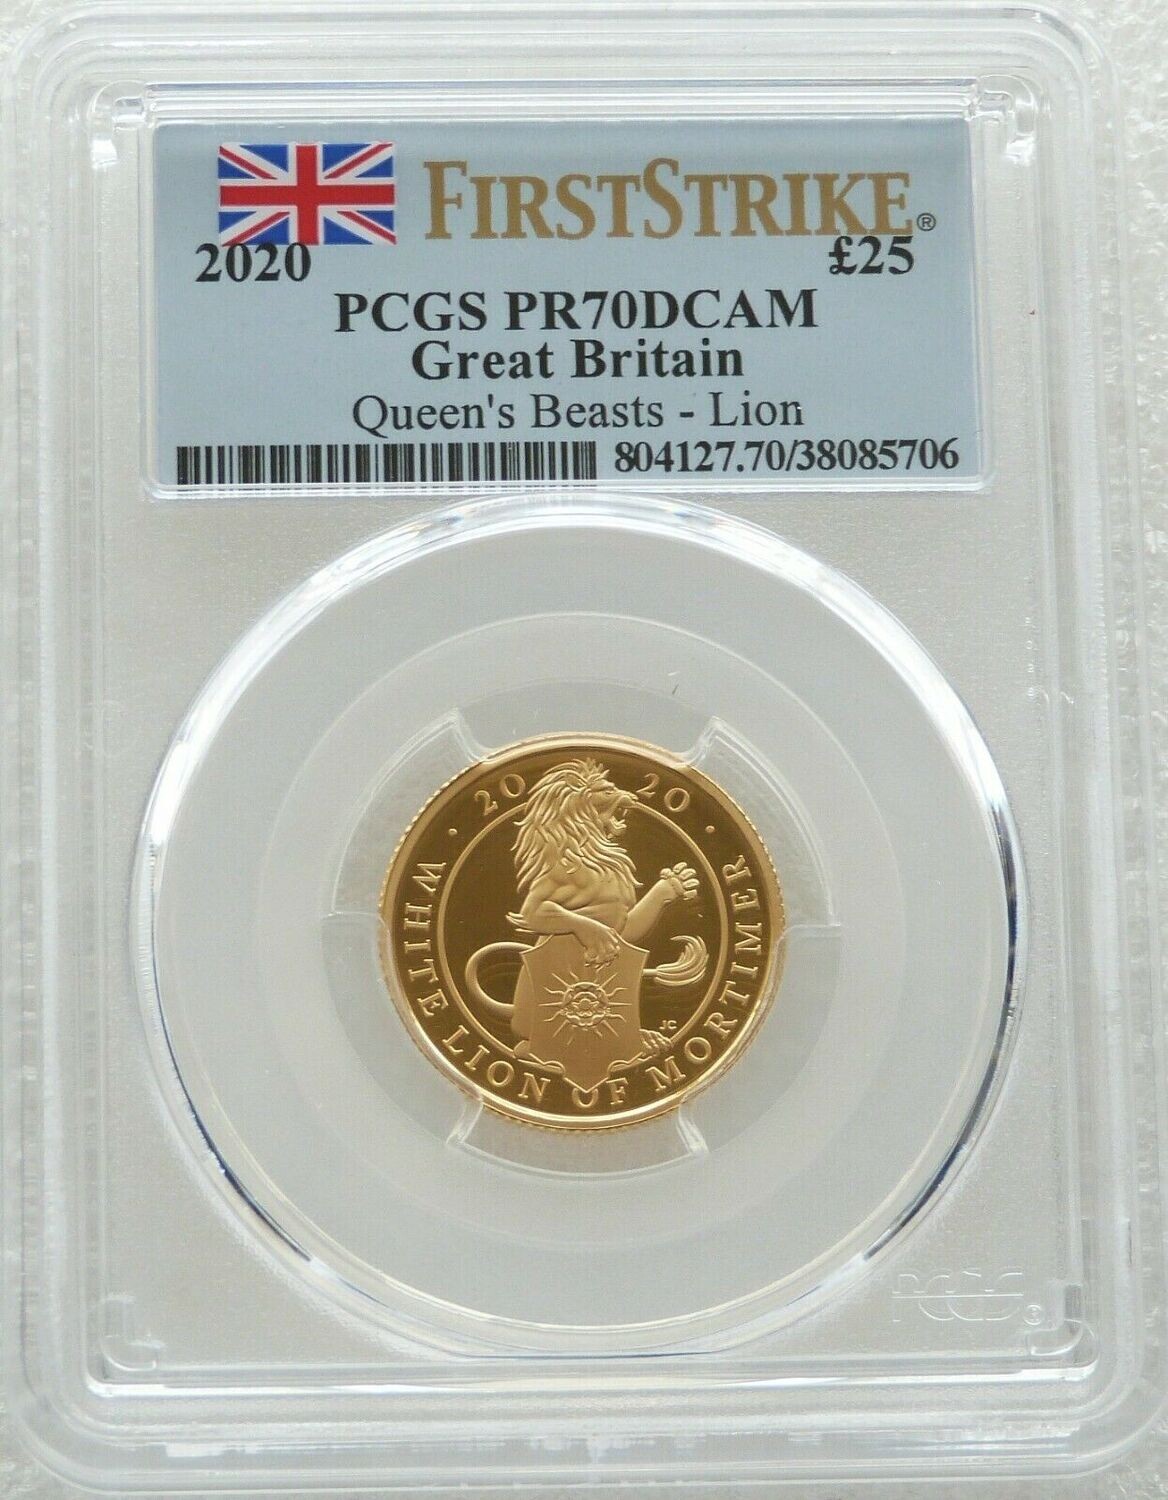 2020 Queens Beasts White Lion of Mortimer £25 Gold Proof 1/4oz Coin PCGS PR70 DCAM First Strike